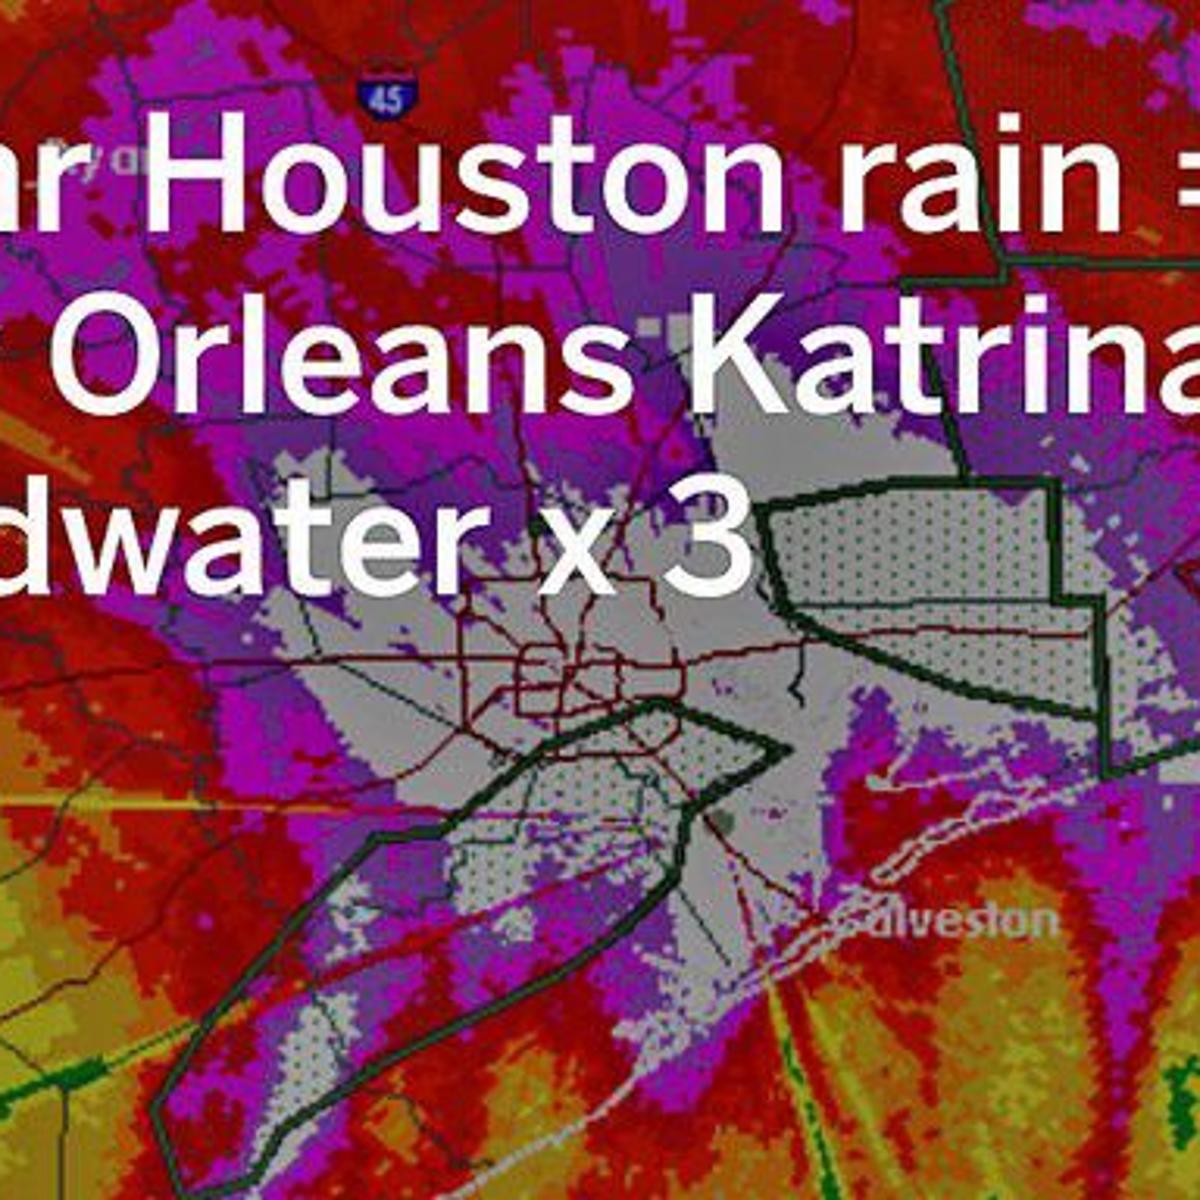 Harvey S 2 Day Rain In Houston Is 3 Times Floodwater Pumped From